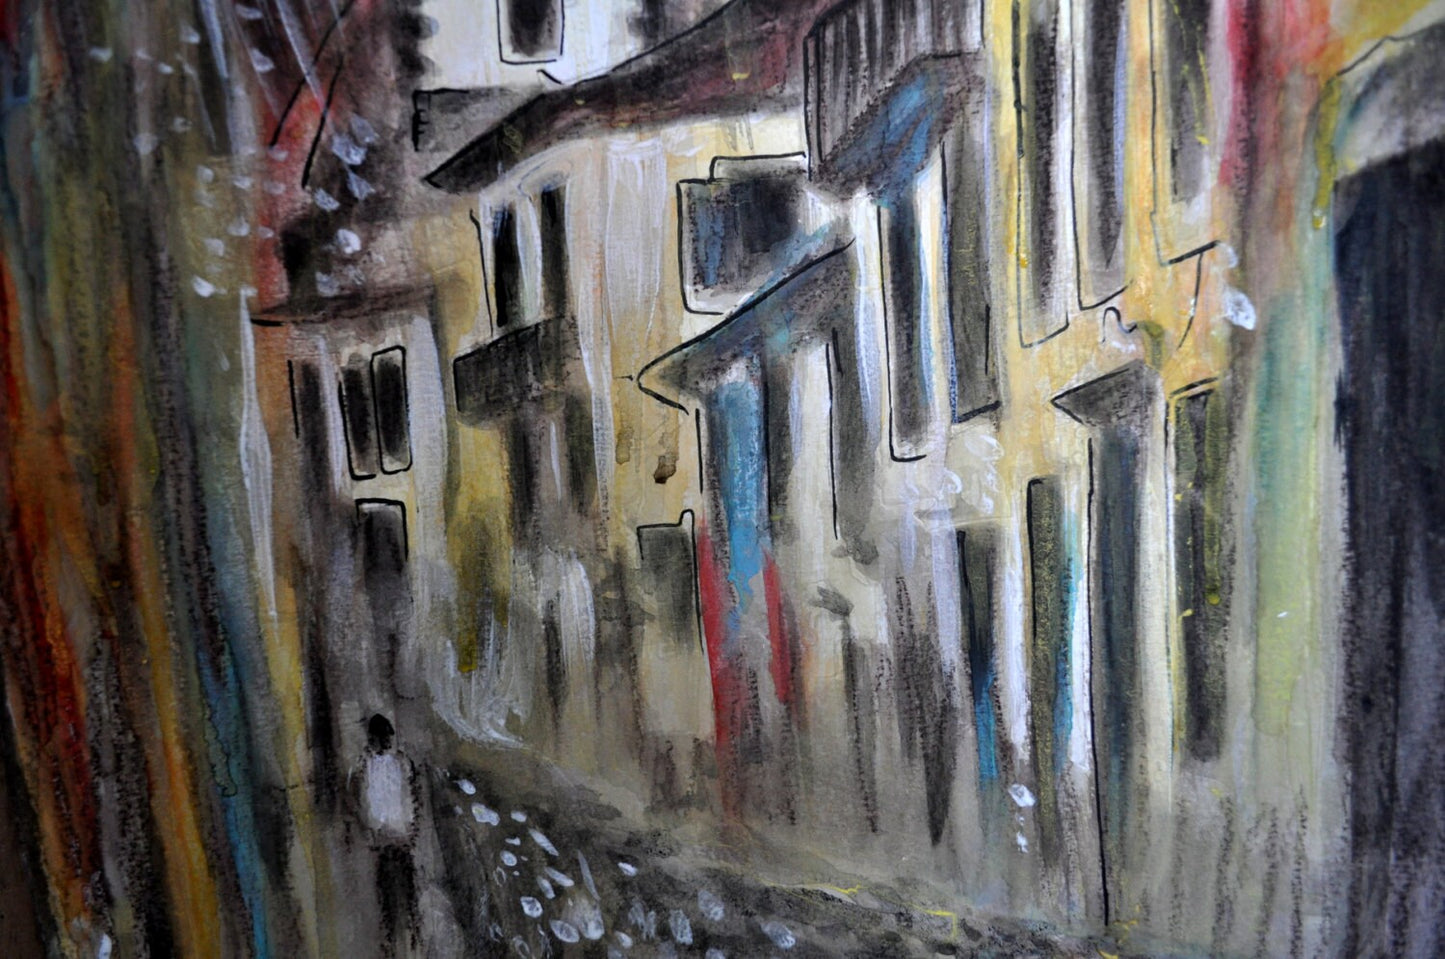 Funchal, Madeira, Watercolor old city view painting, Madeira inspired, Funchal in the Rain, FINE ART PRINT, contemporary art, Alex Solodov.